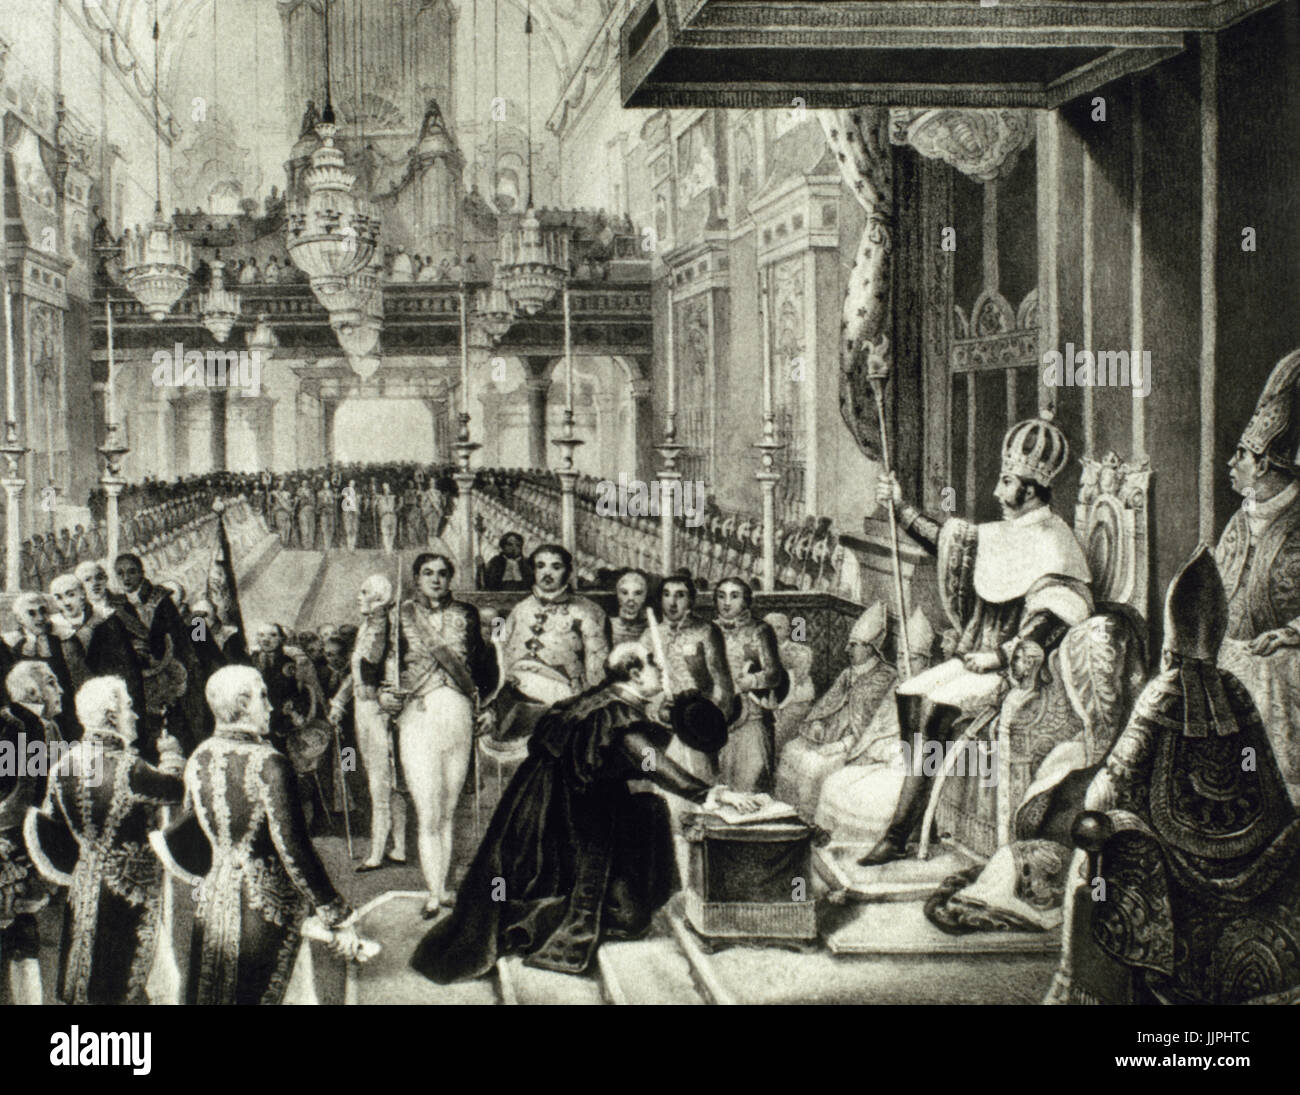 Pedro I of Brazil and IV of Portugal (1798-1834). Emperor of Brazil and King of Portugal. Ceremony of the coronation of Don Pedro celebrated in Rio de Janeiro, December 1, 1822. Engraving. Stock Photo